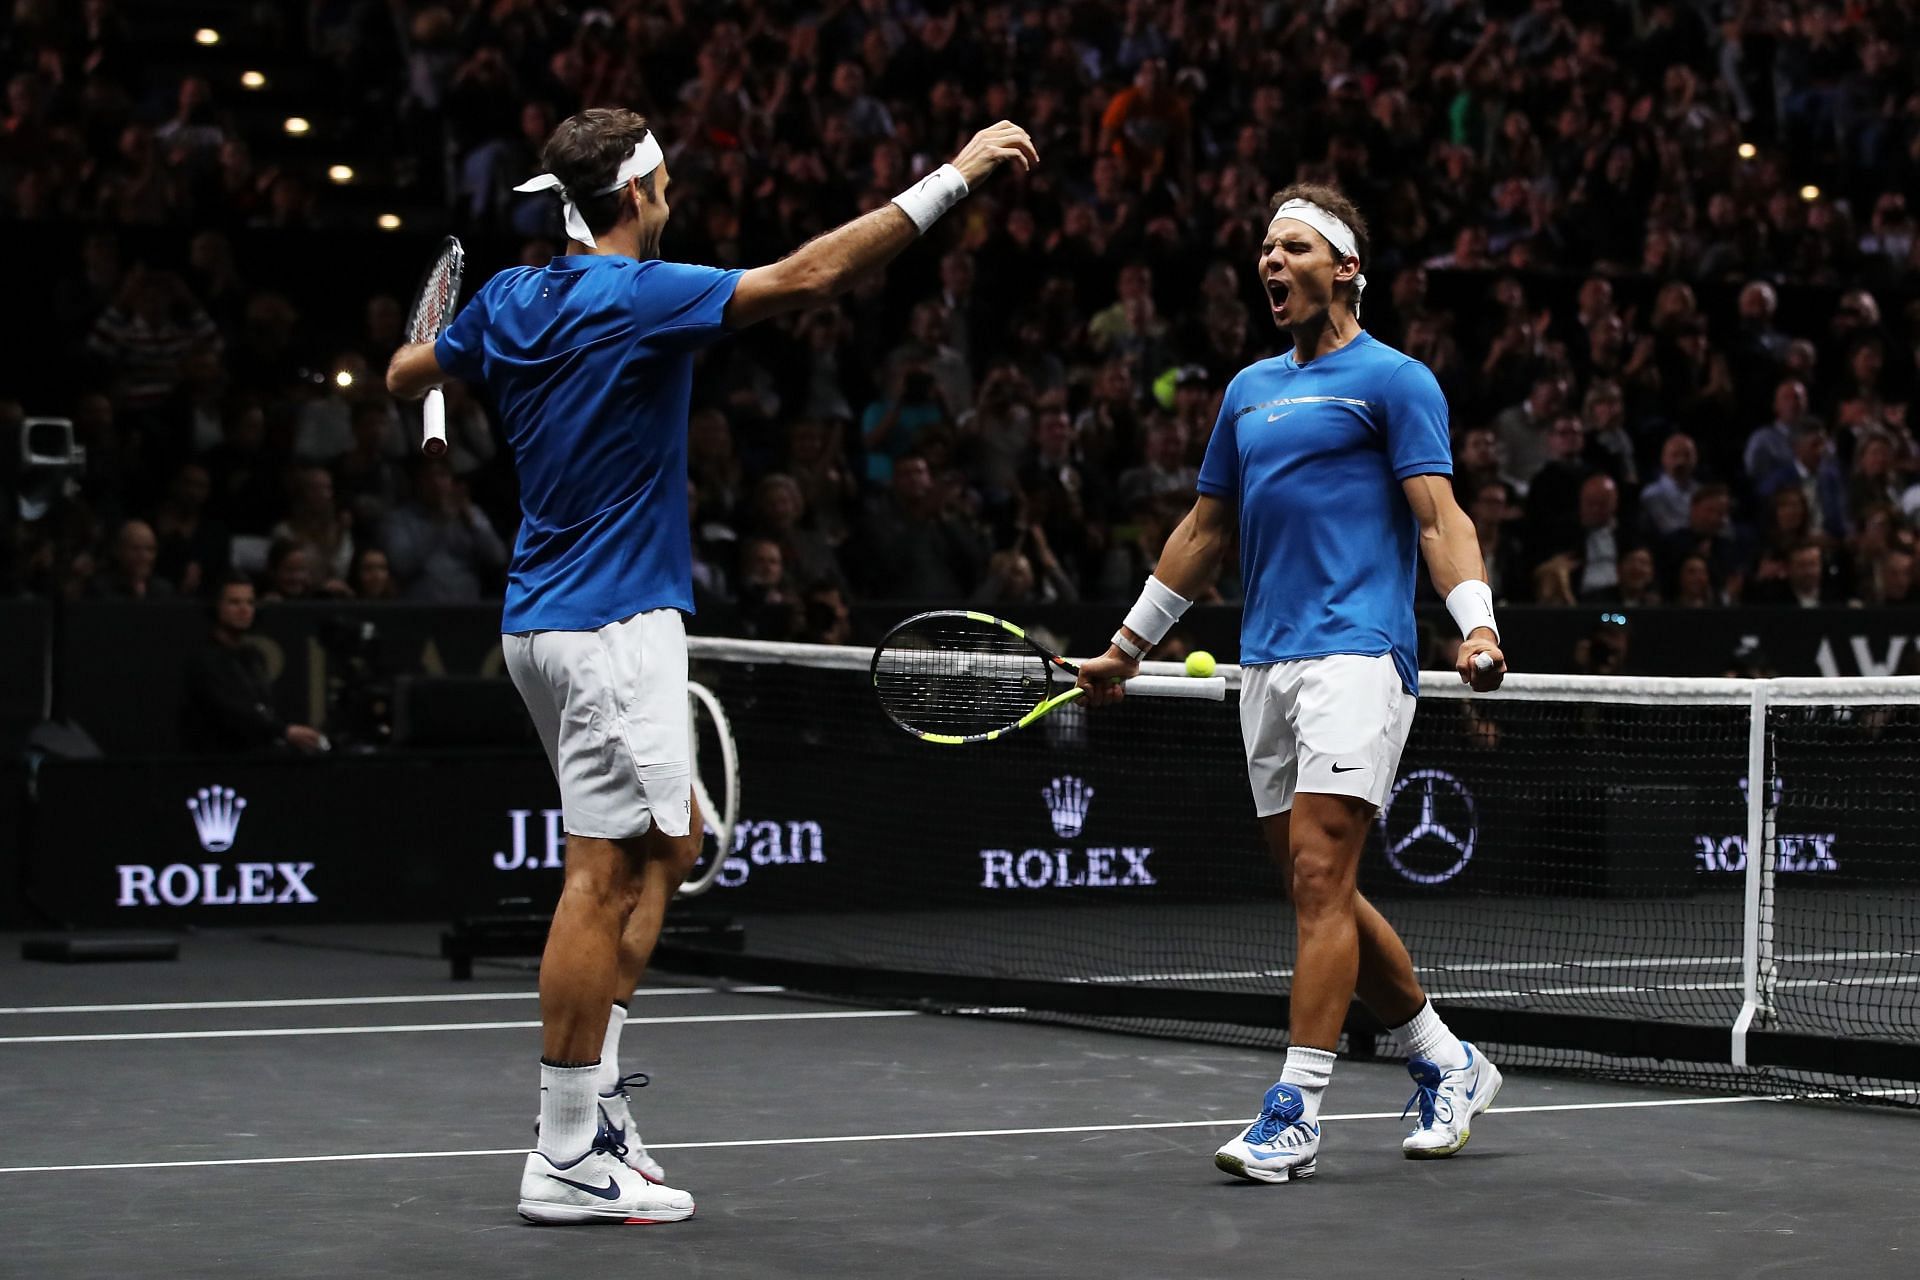 Roger Federere and Rafael Nadal at the 2017 Laver Cup